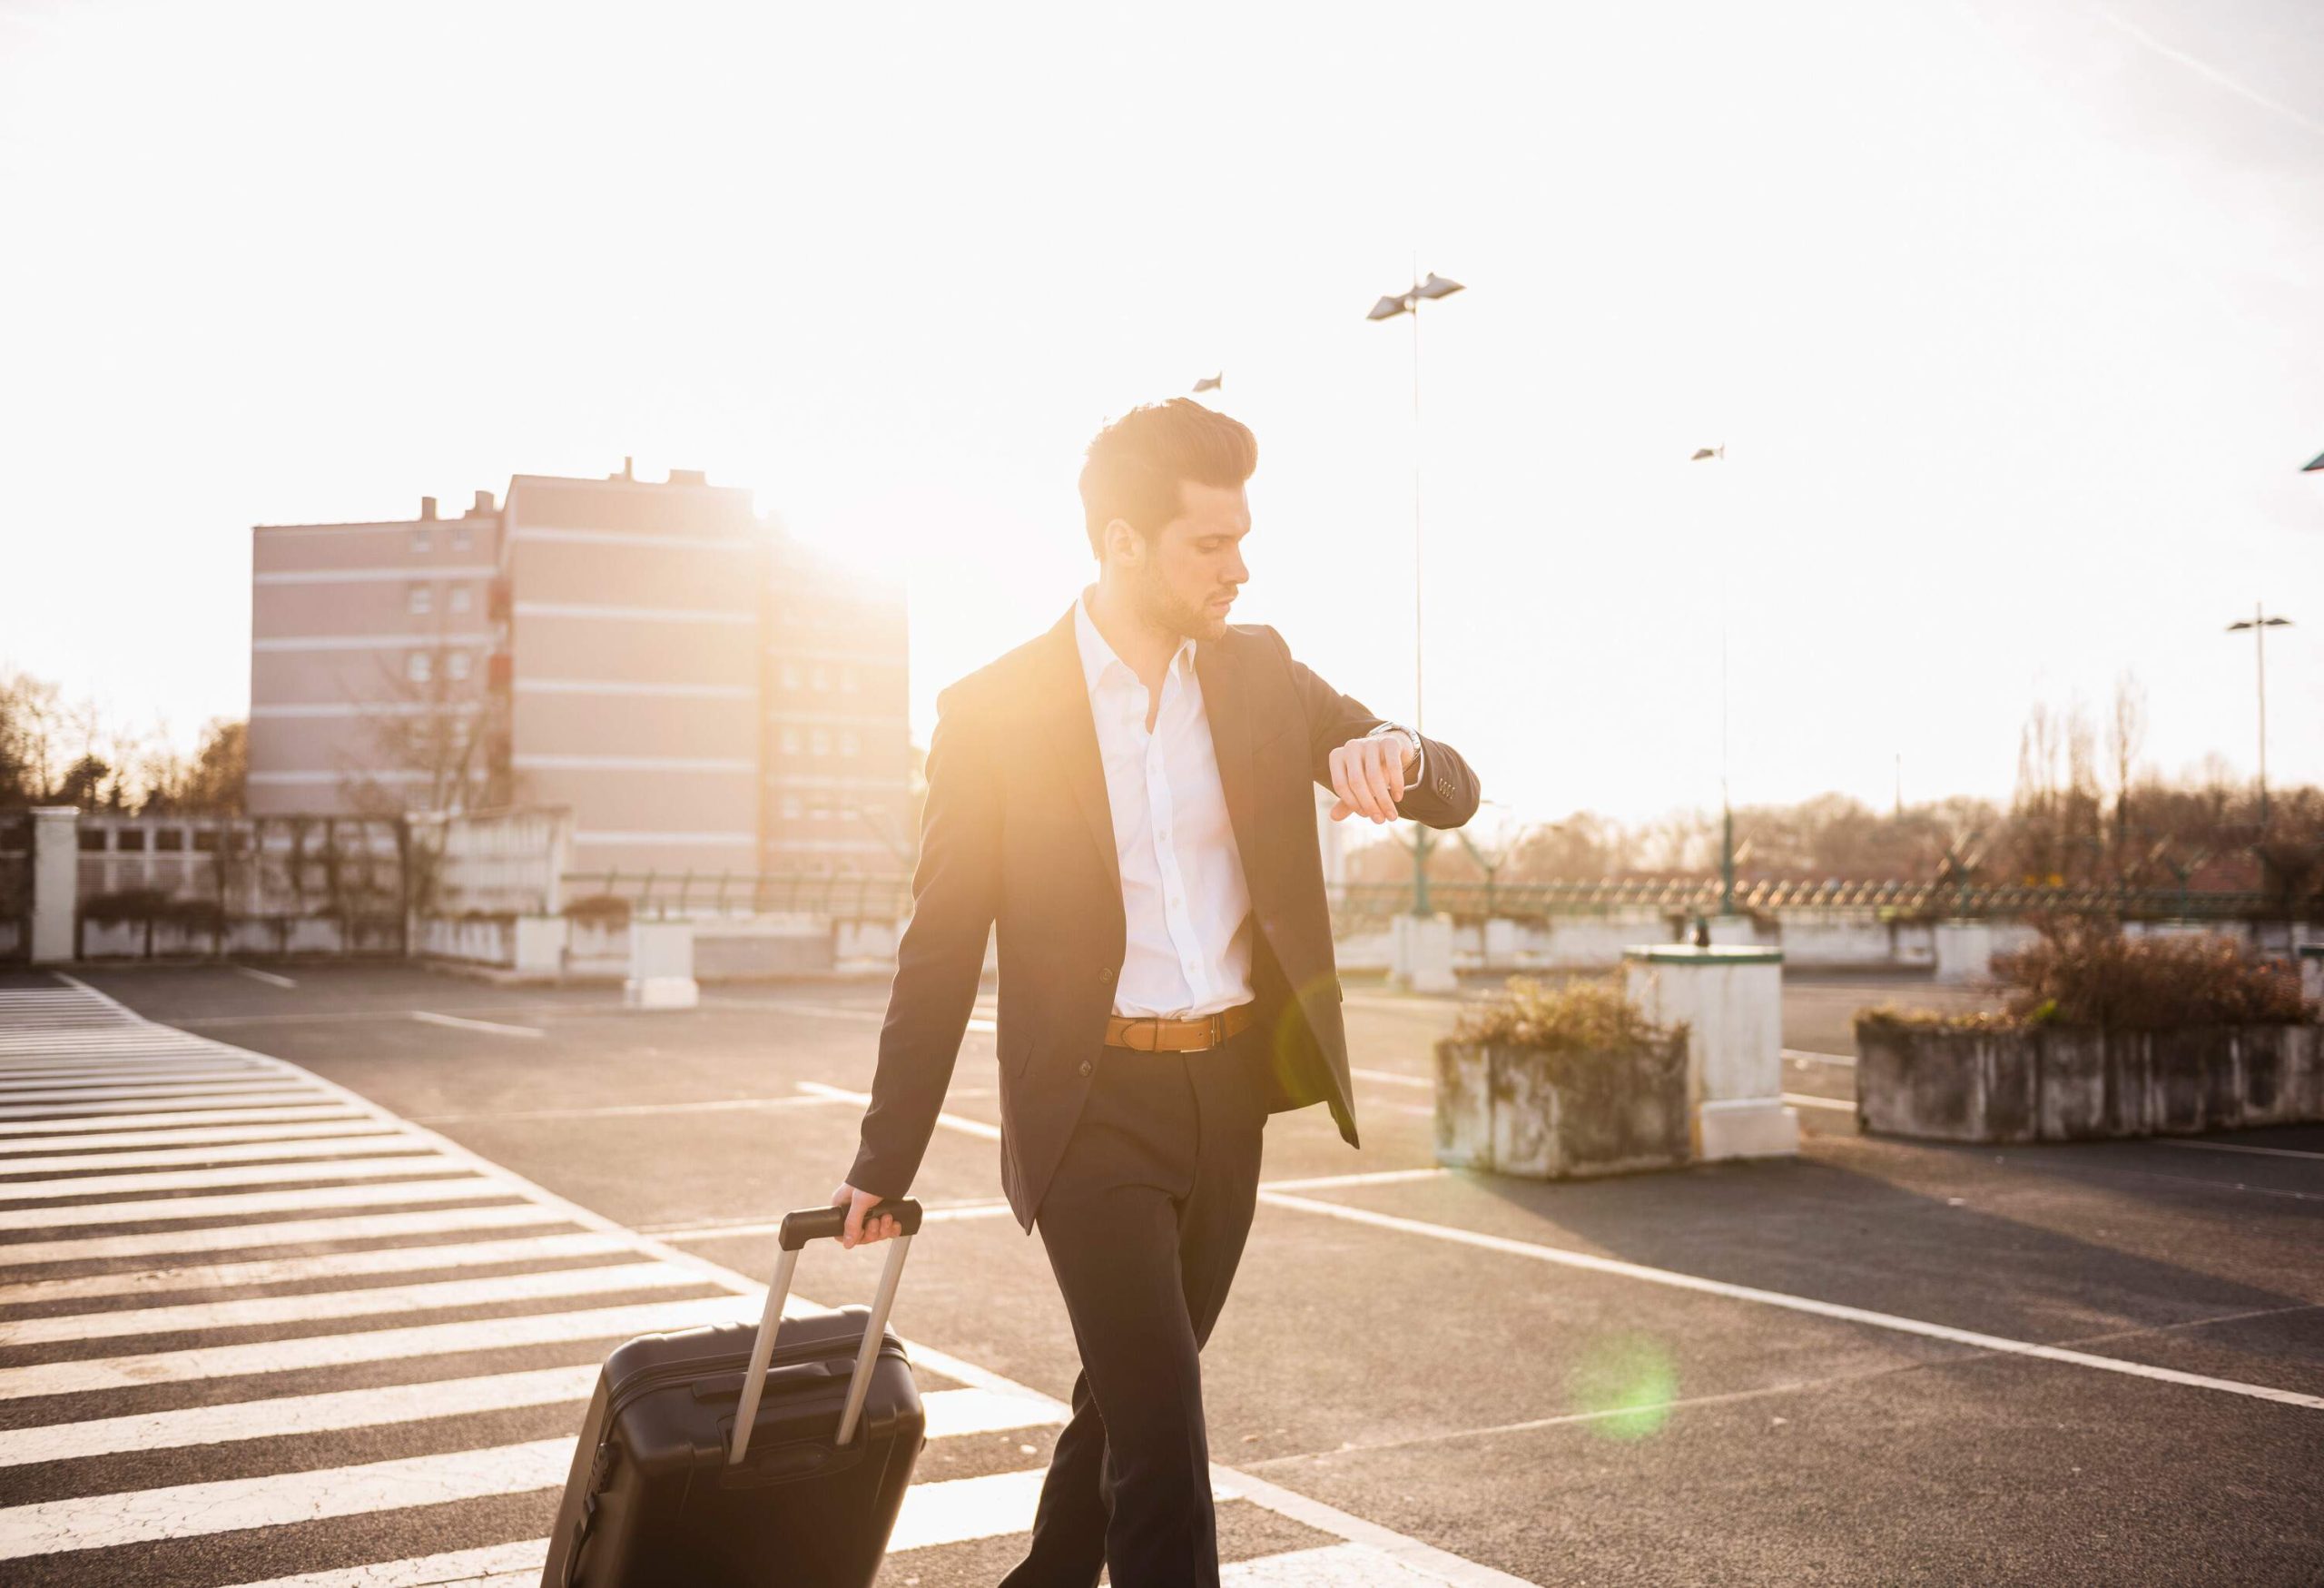 A sharply dressed individual, carrying their luggage, strides purposefully across an empty parking lot.